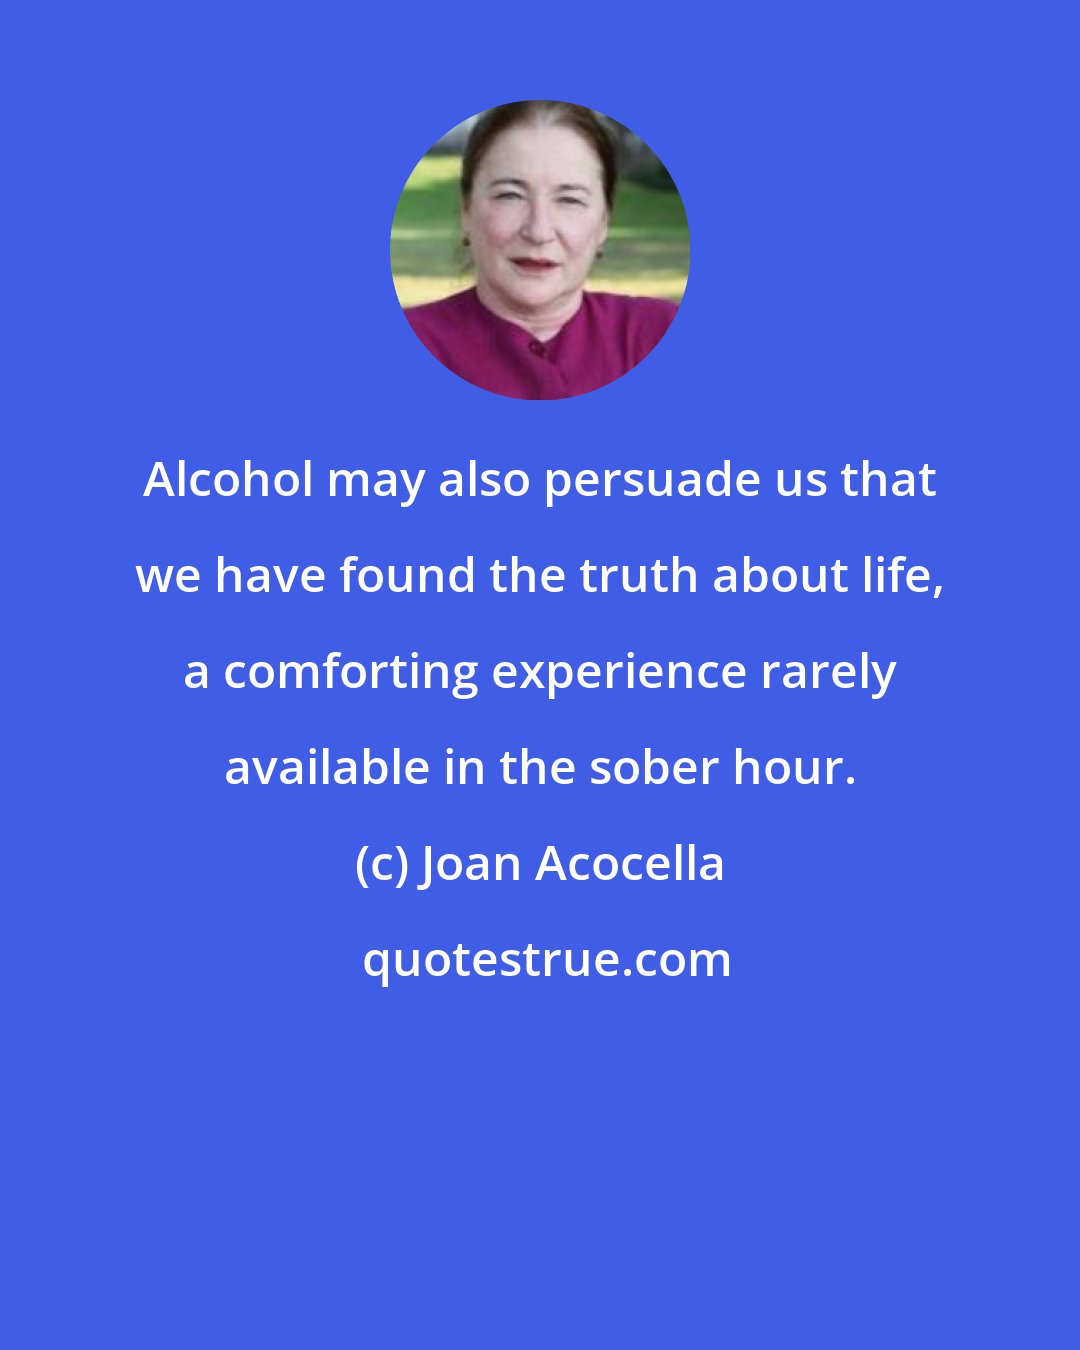 Joan Acocella: Alcohol may also persuade us that we have found the truth about life, a comforting experience rarely available in the sober hour.